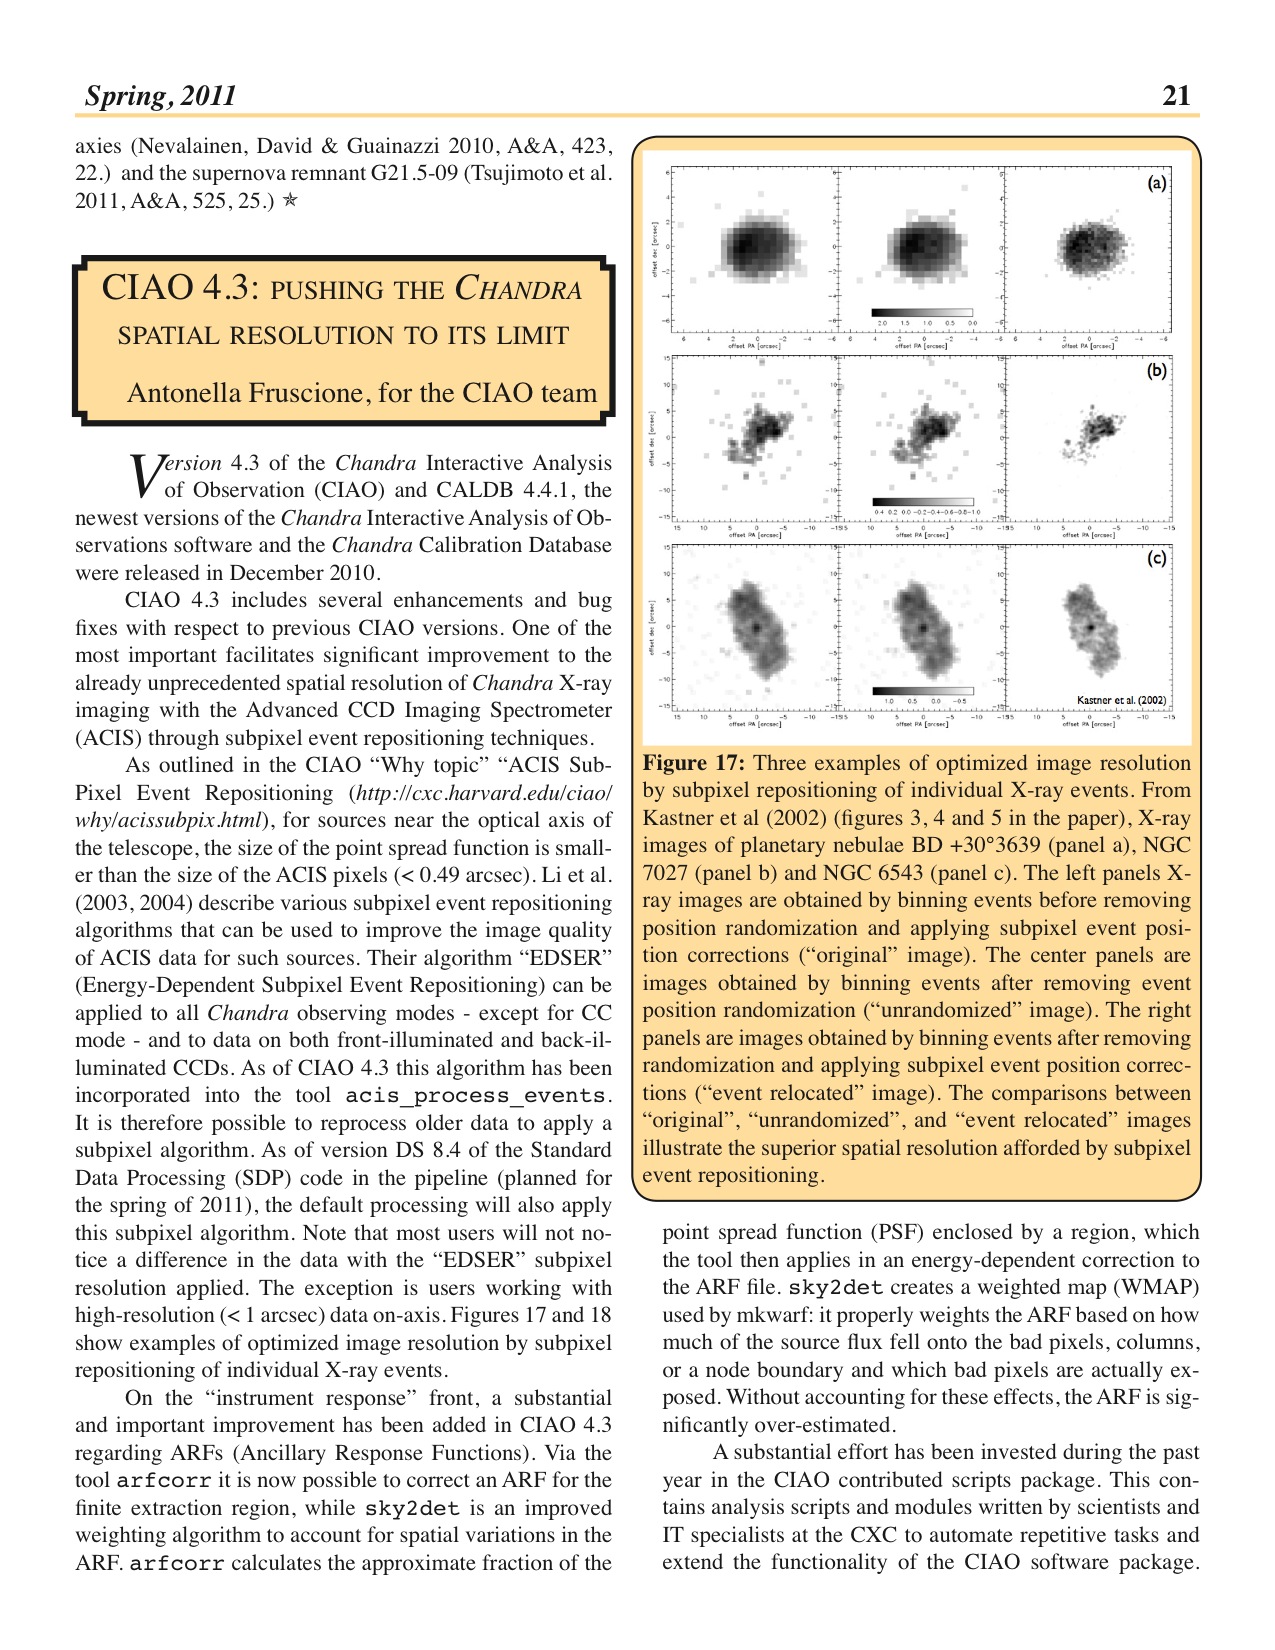 Page 21 of the Chandra Newsletter, issue 18.